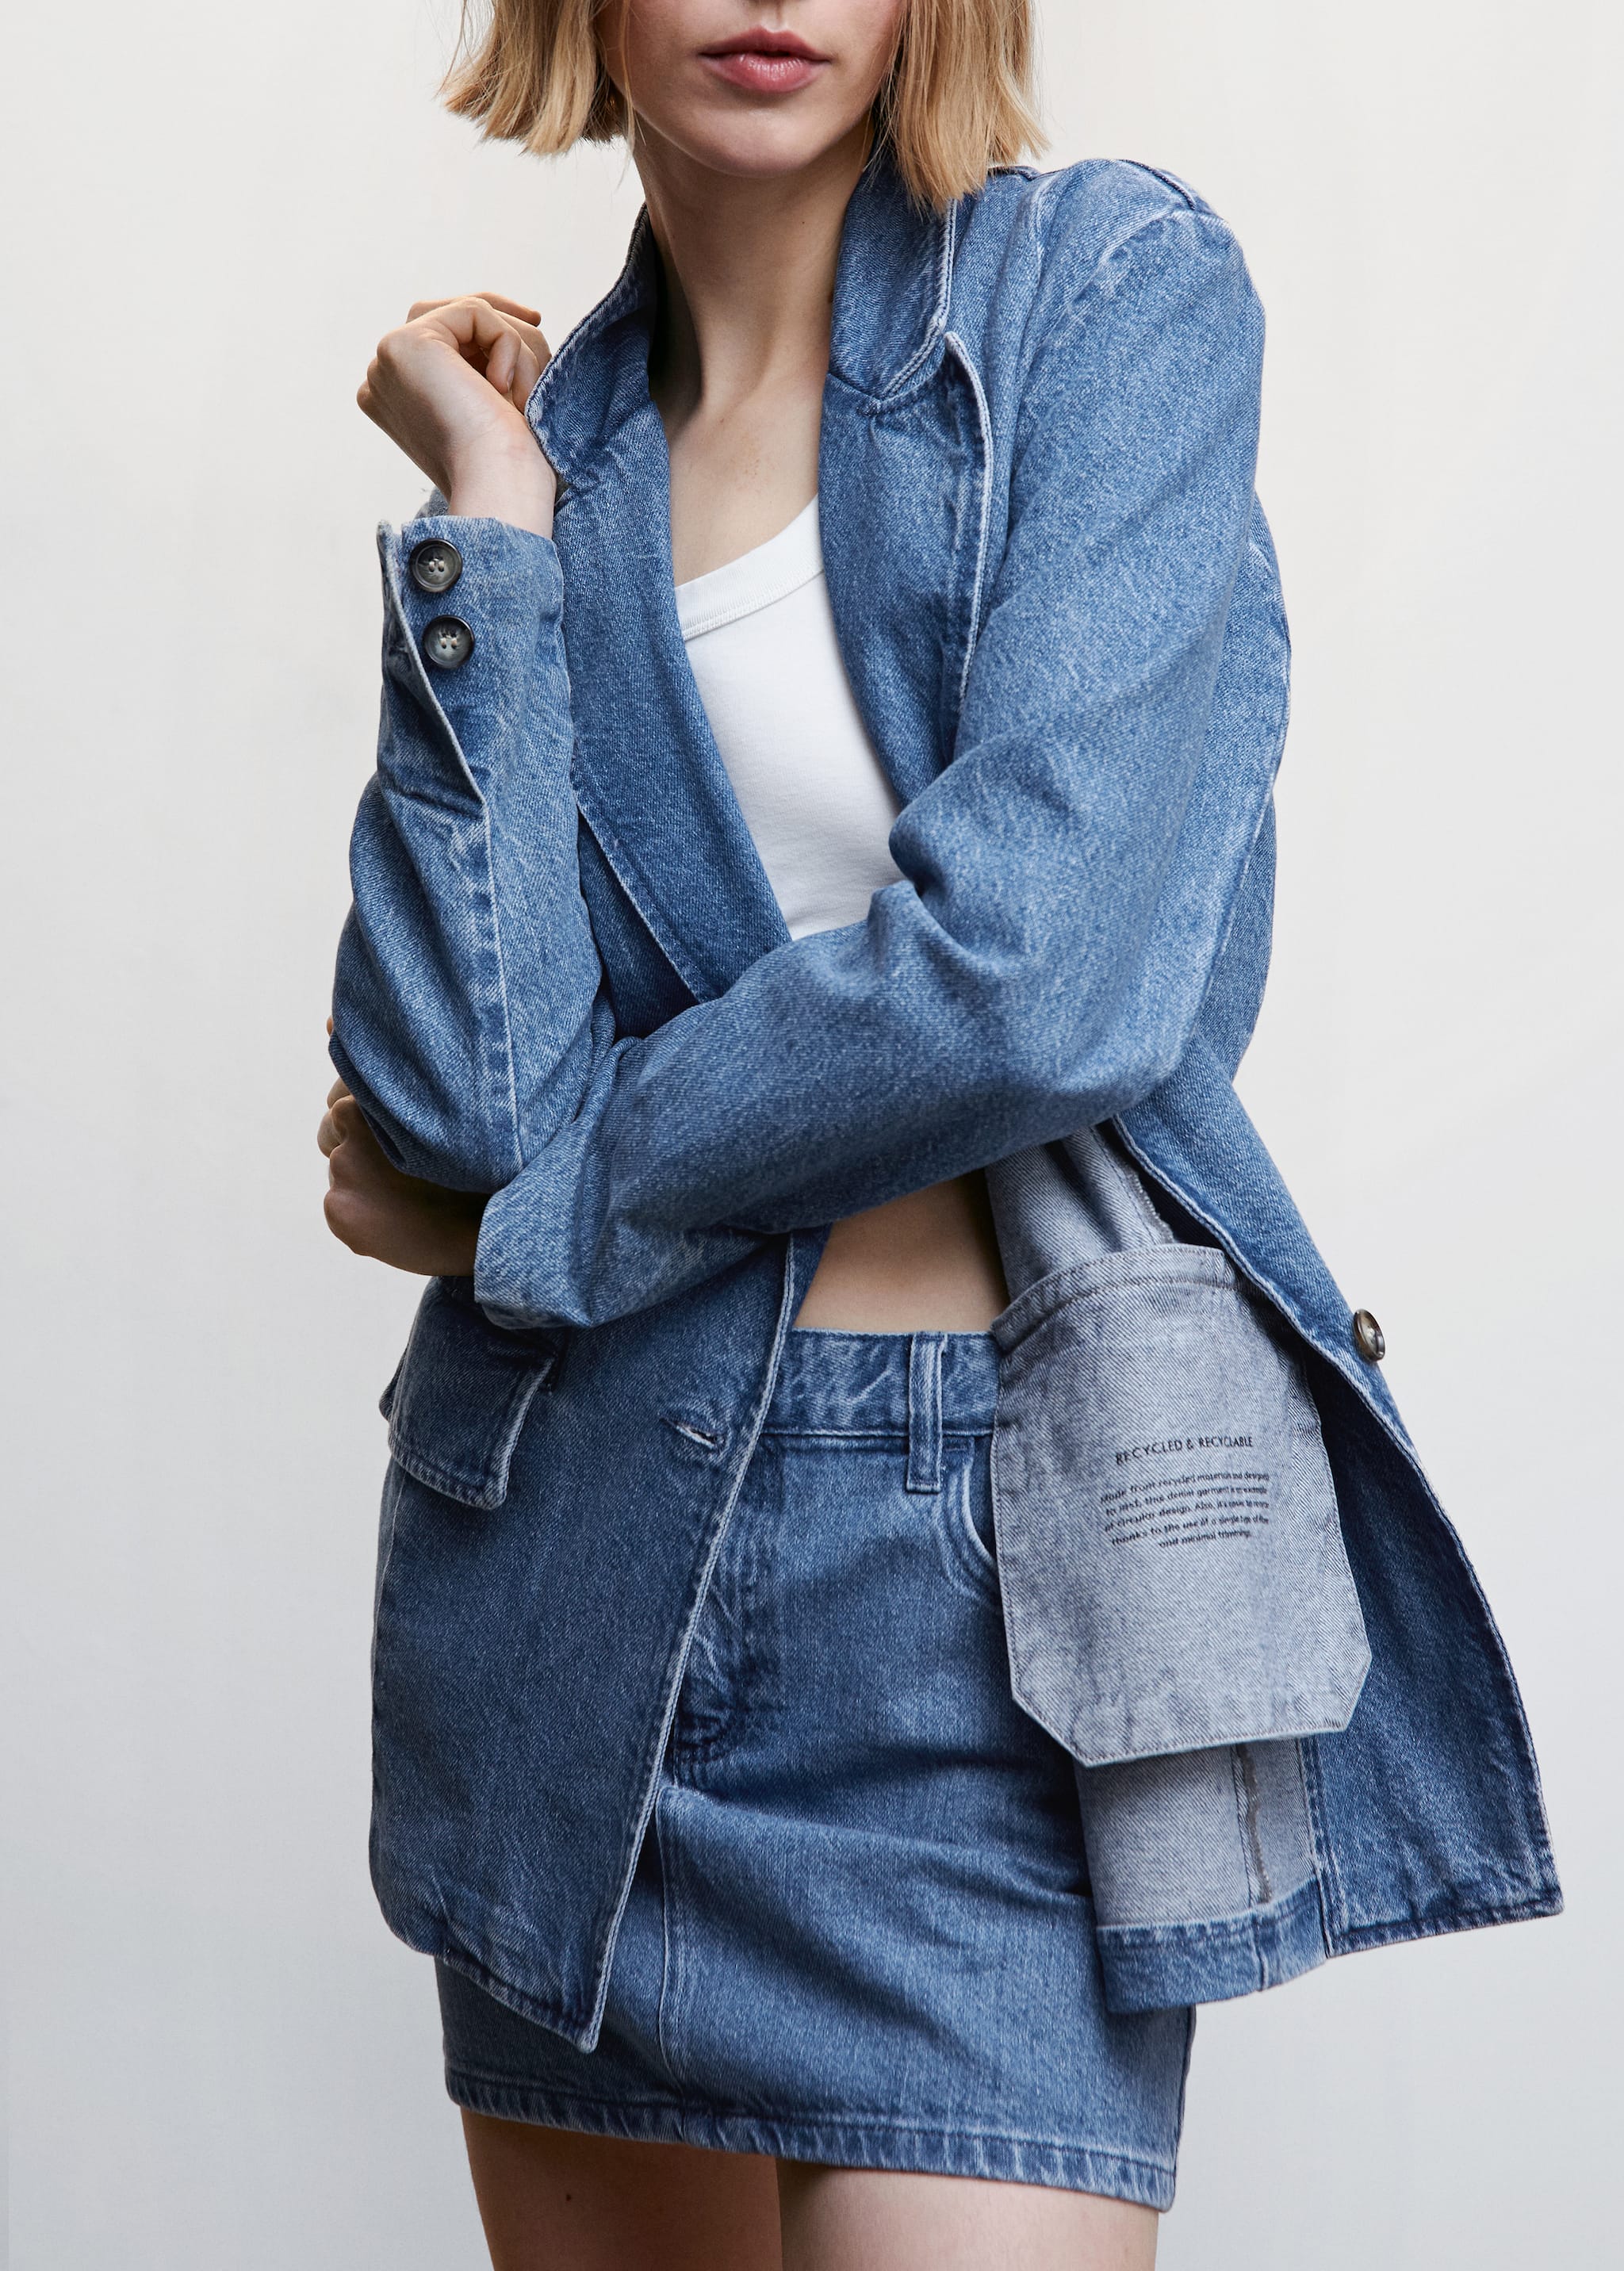 Denim jacket with pockets - Details of the article 6